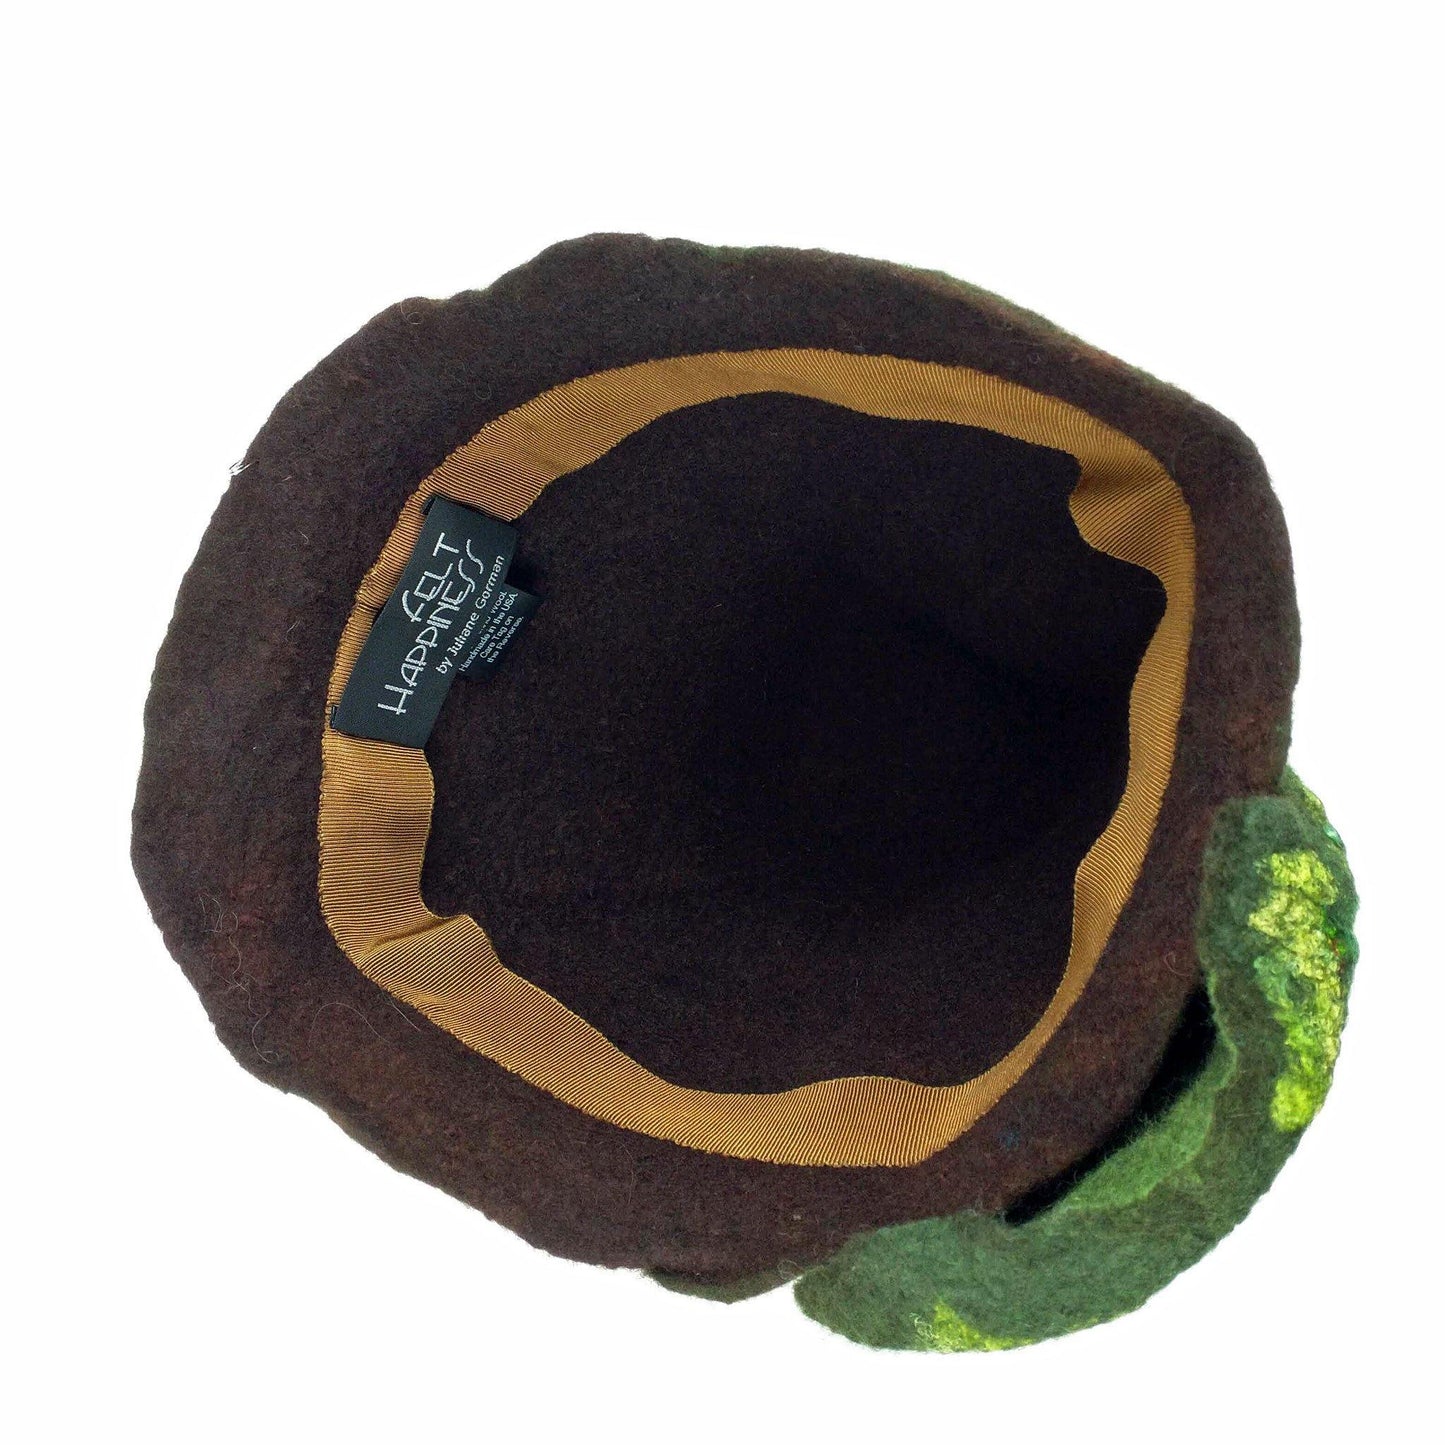 Mossy Forest Felted Fez - inside view